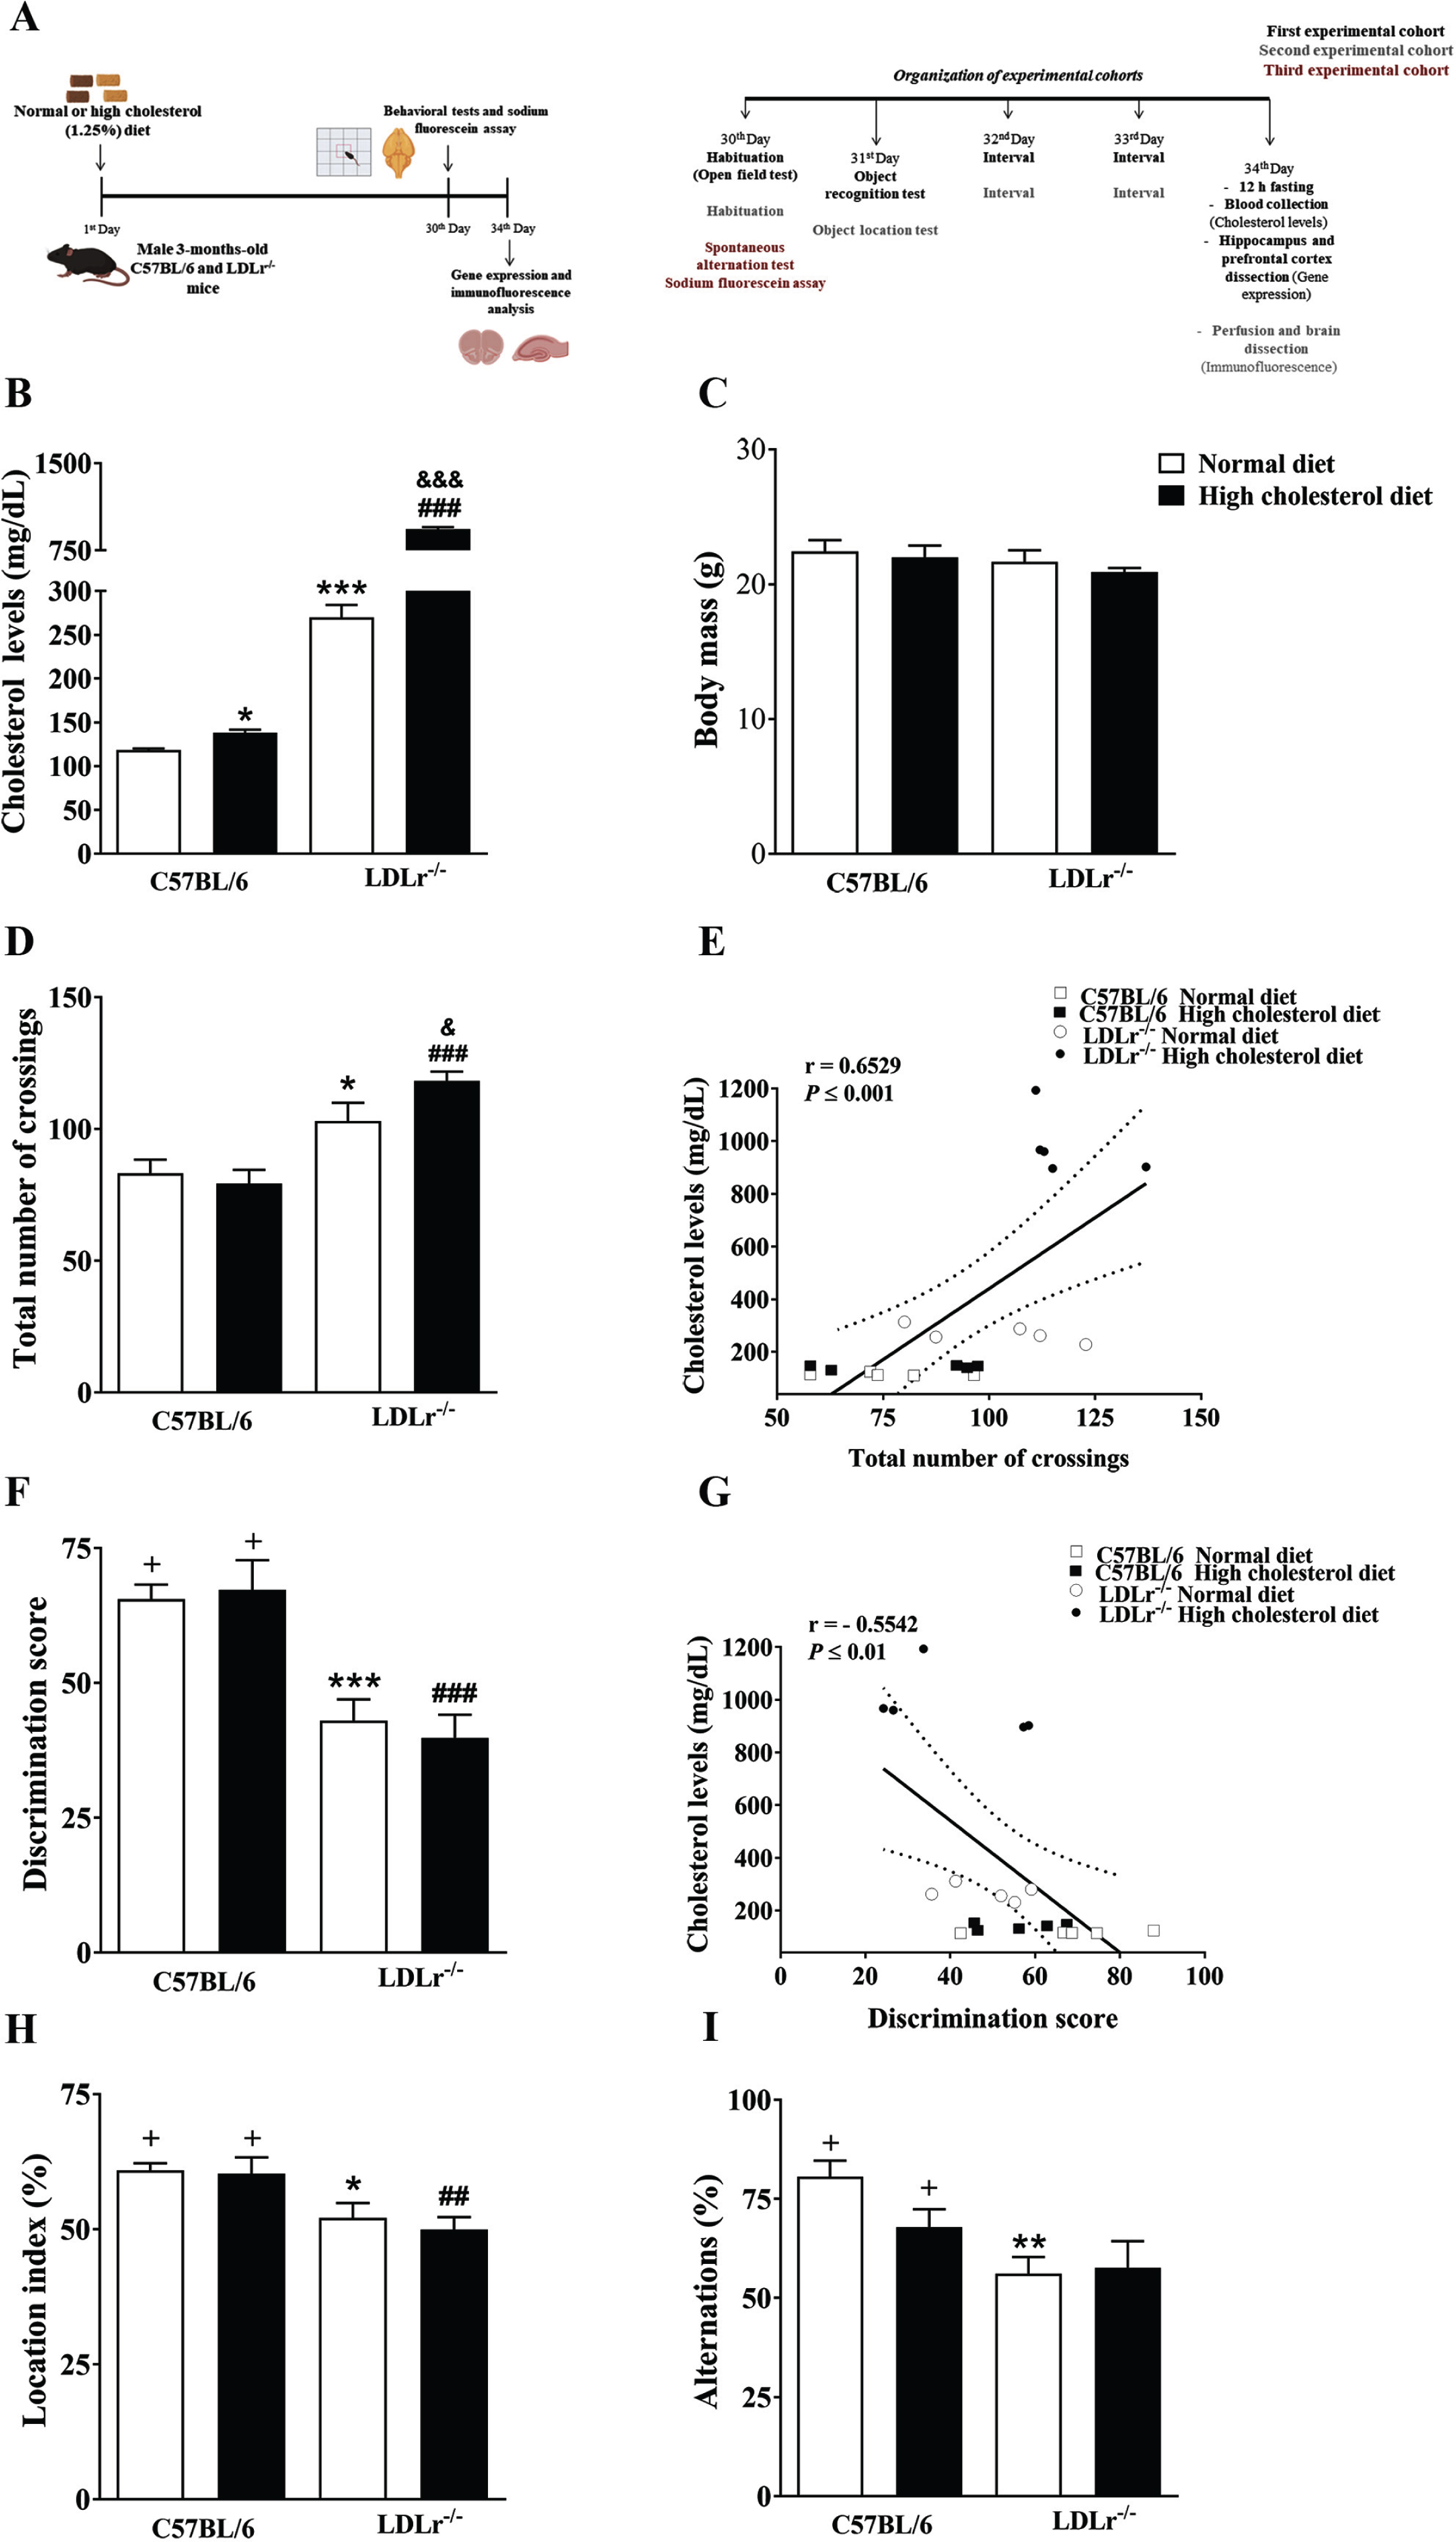 Experimental protocol, physiological parameters, and cognitive function of C57BL/6 wild-type and LDLr–/– mice after normal or high cholesterol diets. A) Experimental design: The C57BL/6 and LDLr–/– mice were exposed for thirty days to normal or high cholesterol diet (1.25% of cholesterol). In the end, the animals were submitted to behavioral tasks and sodium fluorescein assay. The sodium fluorescein assay was used to analyze the blood-brain barrier permeability. Afterwards, the mice’s brains were prepared for gene expression and immunofluorescence analysis. Also, plasma total cholesterol levels and body weight were evaluated. B) Cholesterol levels. C) Body mass. D) Locomotor activity (open field). E) A significant correlation between cholesterol levels and the total number of crossings in the open field test. F) Recognition memory (object recognition test). G) A significant correlation between cholesterol levels and discriminatory score (Pearson’s correlations). H) Spatial memory (object location test). I) Working memory (spontaneous alternation test). Data are expressed as the mean±SEM (n = 4–5 for cholesterol analysis and n = 8 for weight gain and behavioral analysis). *p < 0.05, **p < 0.01 and ***p < 0.001 compared with C57BL/6 mice fed with a normal diet, ##p < 0.01 and ###p < 0.001 compared with C57BL/6 mice fed with a high cholesterol diet, and &p < 0.05 and &&&p < 0.001 compared with LDLr–/– mice fed with a normal diet (Two-way ANOVA followed by Duncan post-hoc test). +p < 0.05 versus chance levels (50% of a new object or displaced object investigation in test trial and spontaneous alternations, respectively; one-sample t-tests).